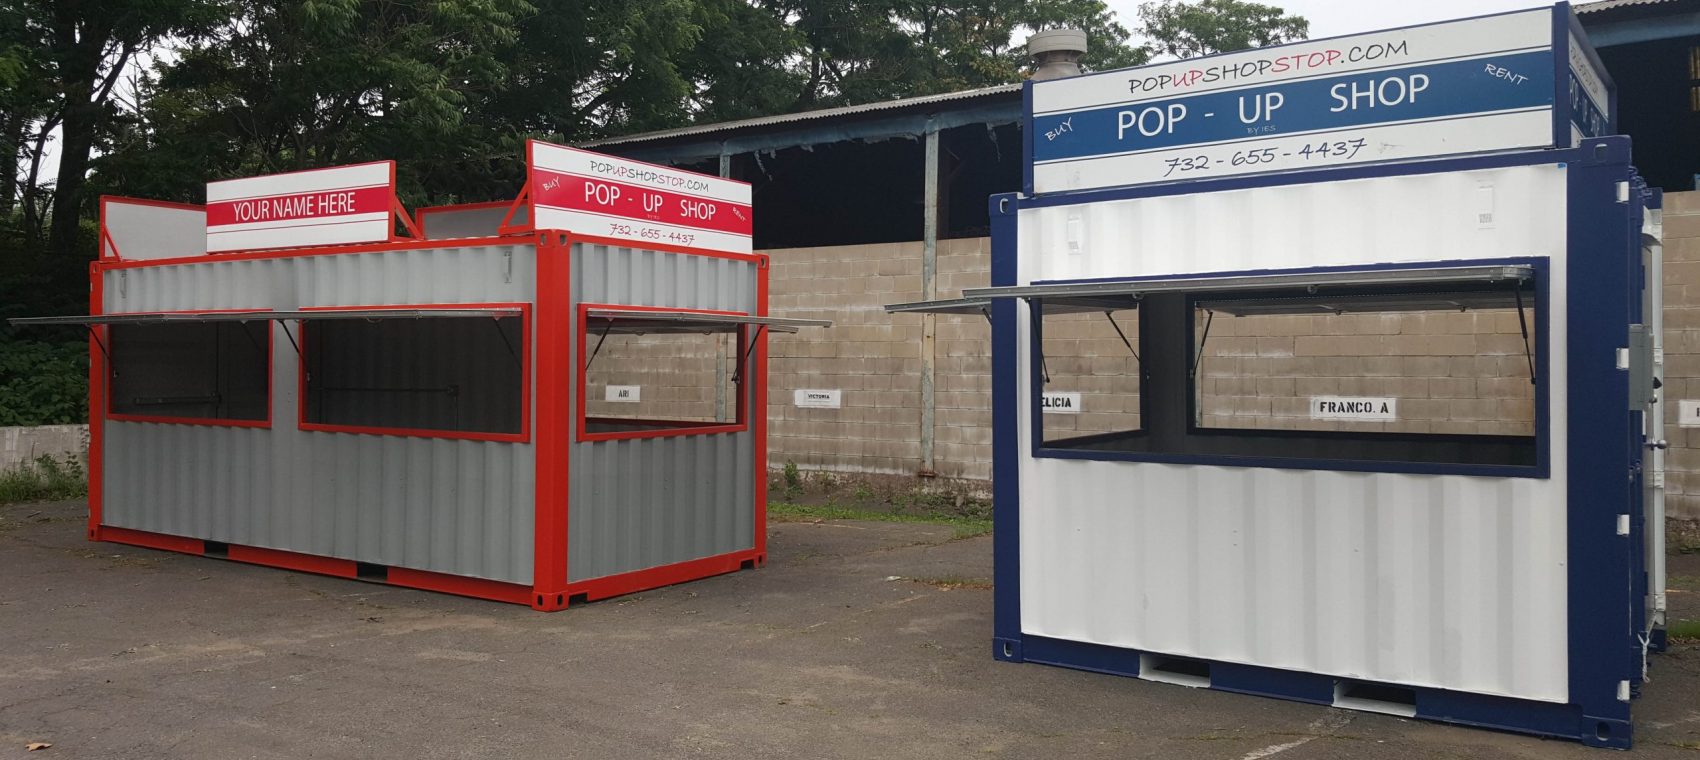 20150702 124457 scaled - Container Pop Up Shop & Portable Concession Stands